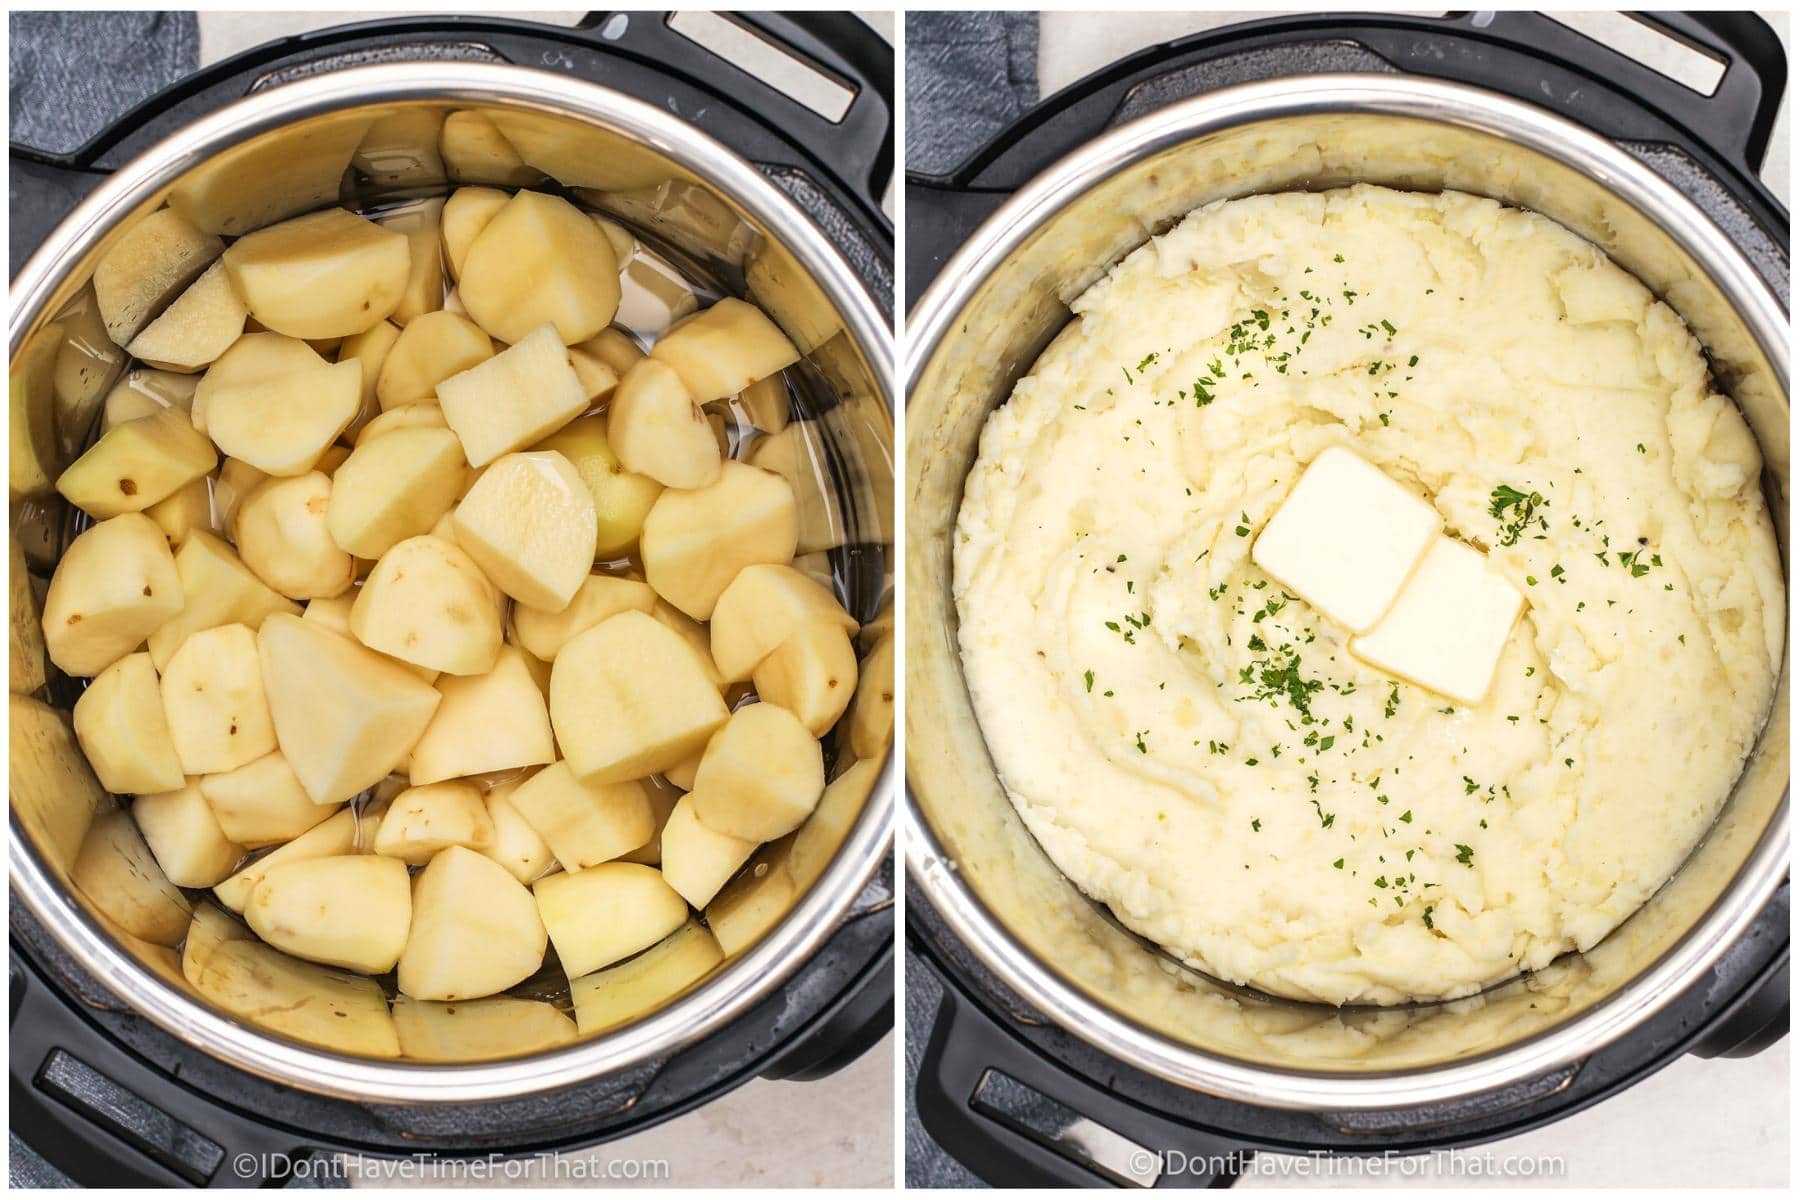 process of adding ingredients together to make Instant Pot Mashed Potatoes